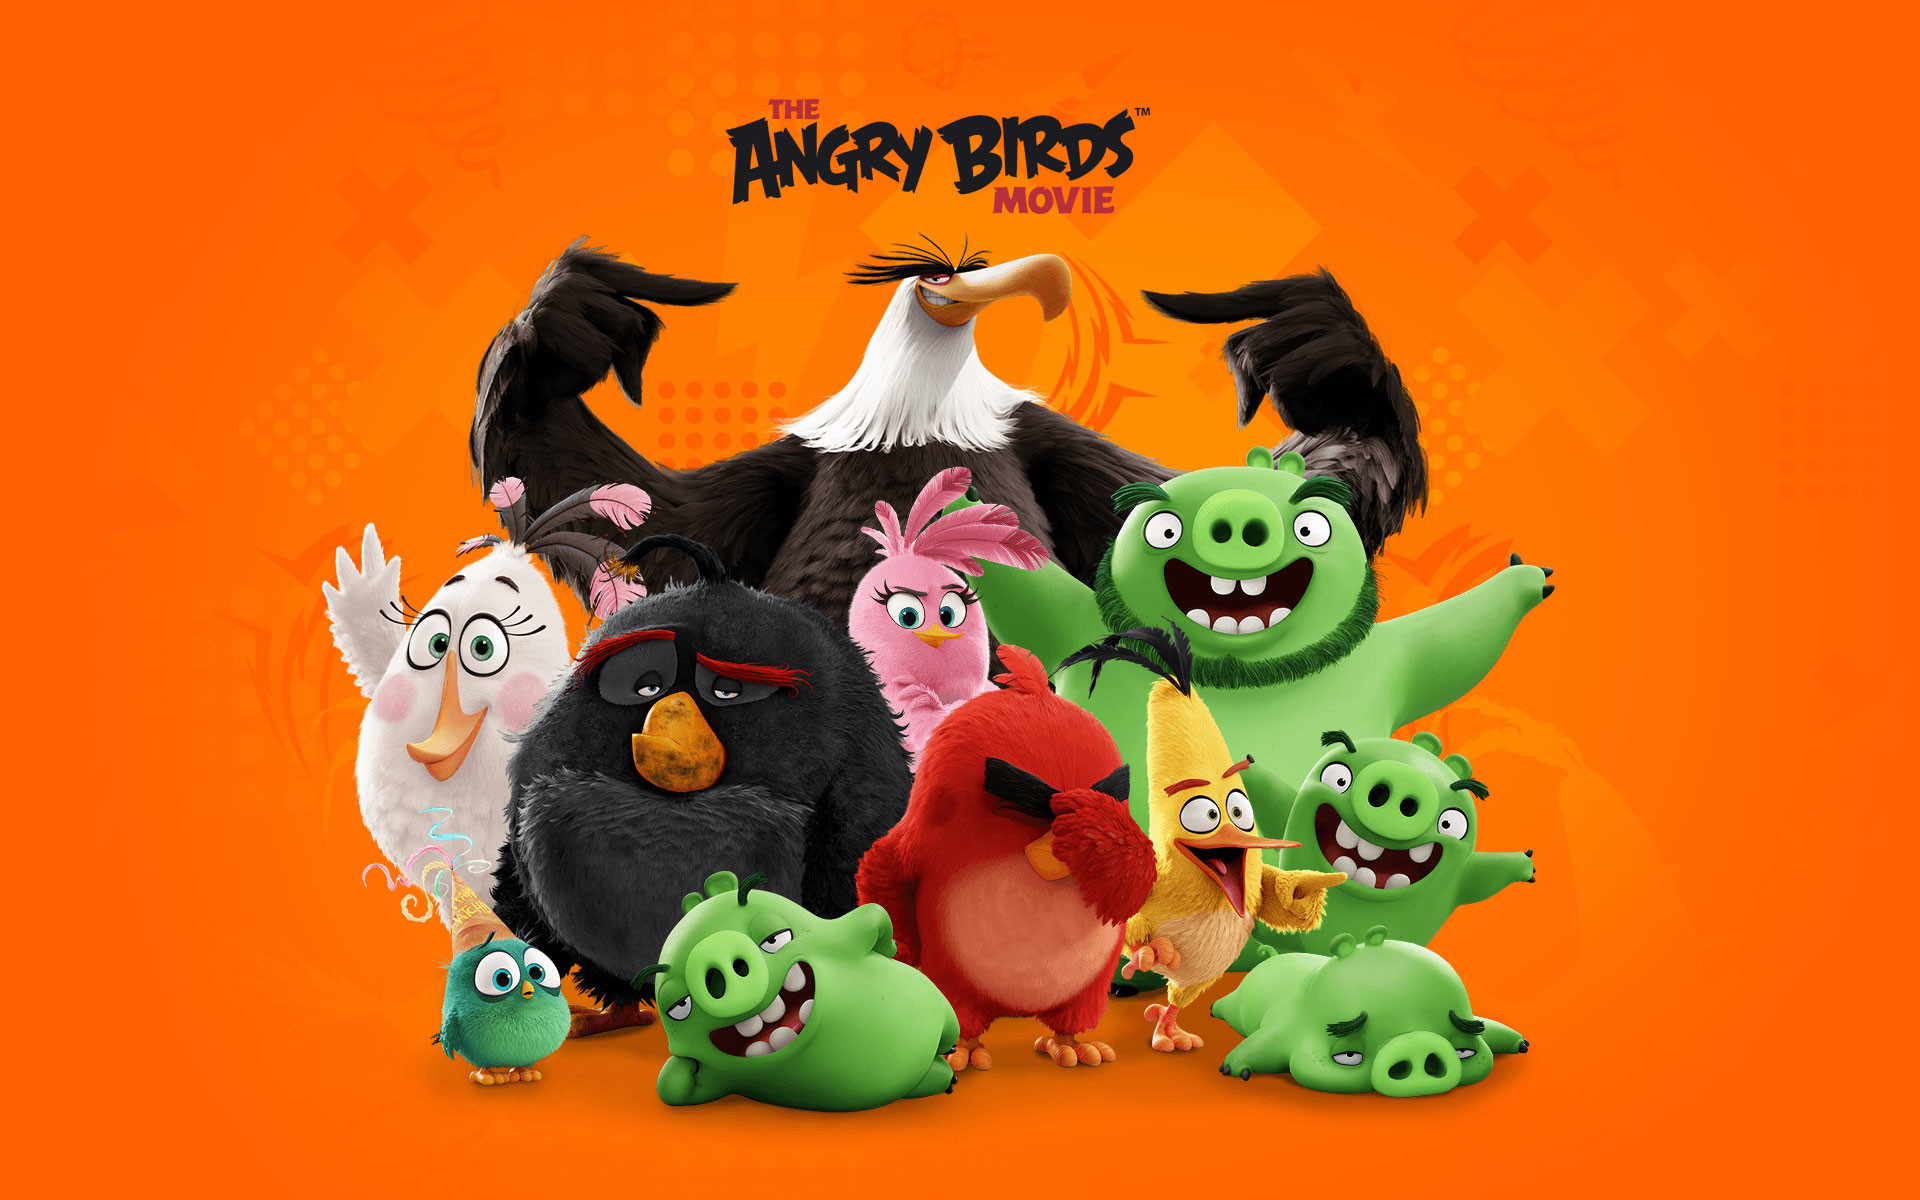 1920x1200 The Angry Birds Movie 2016 Cast Wallpaper HD 1920 x 1200